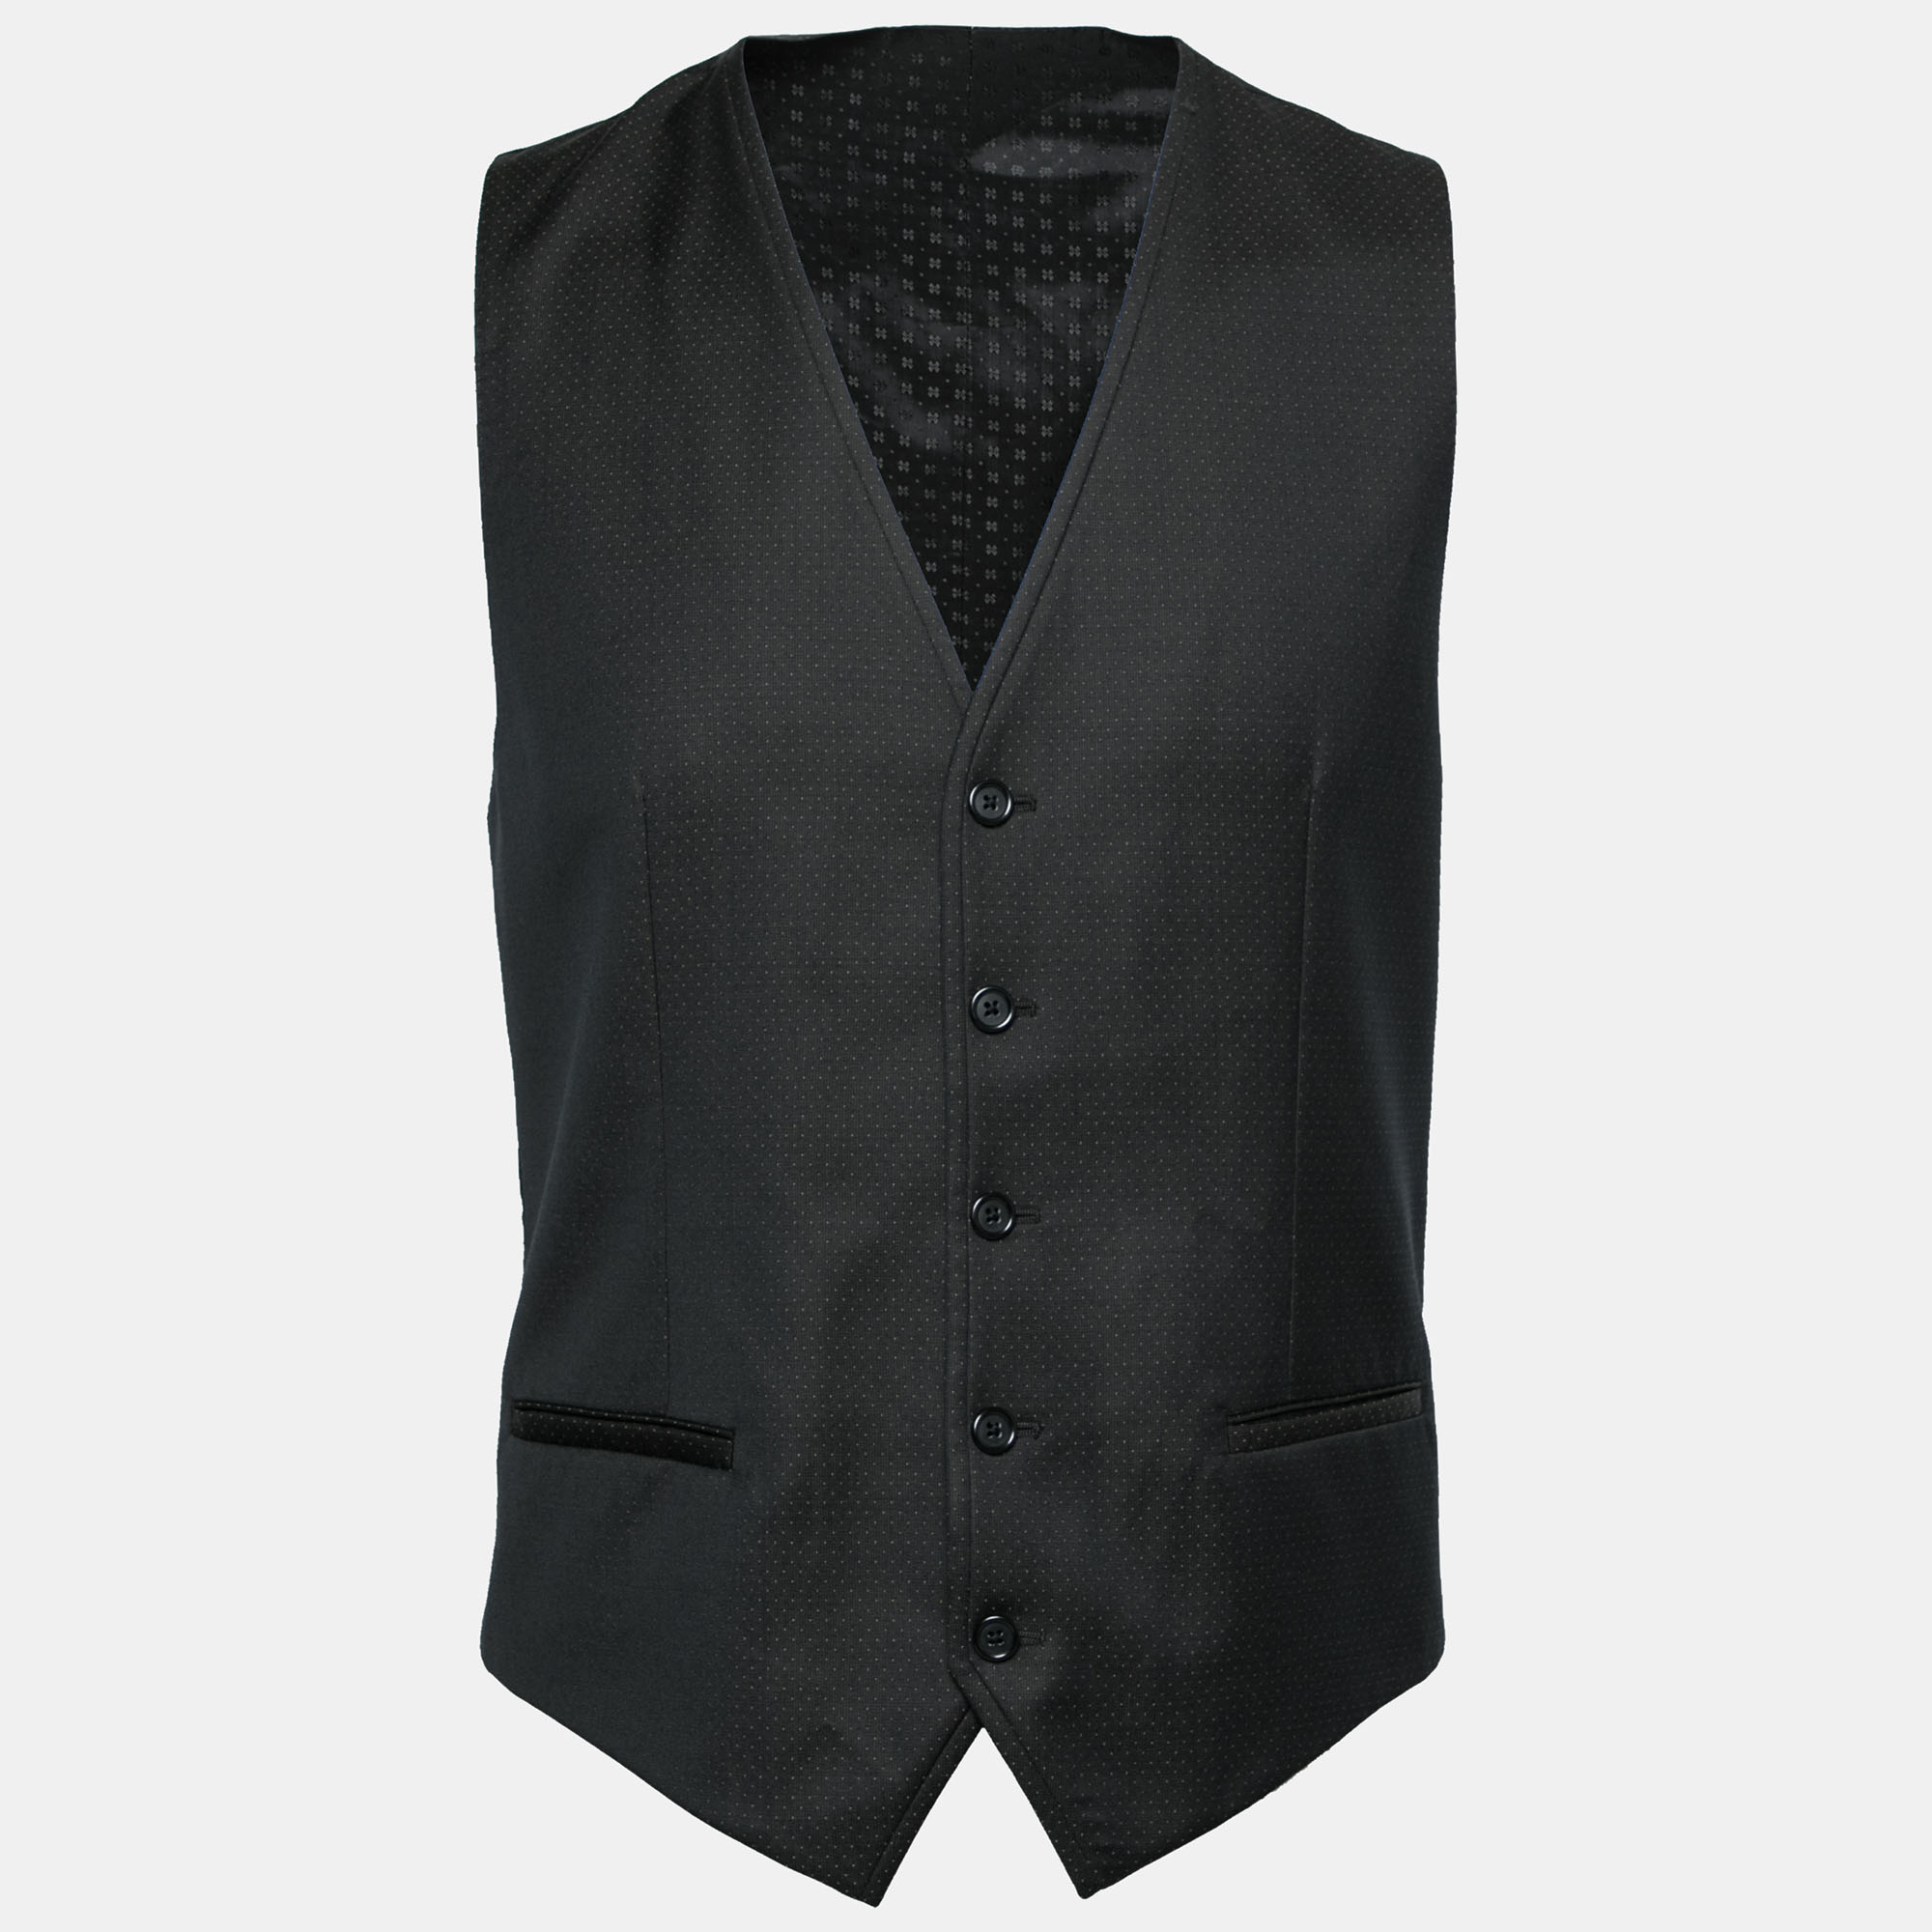 This mens waistcoat from Dolce and Gabbana aims to lend an opulent finish. It is tailored using wool and detailed with polka dots front button closure and a belt strap at the back.